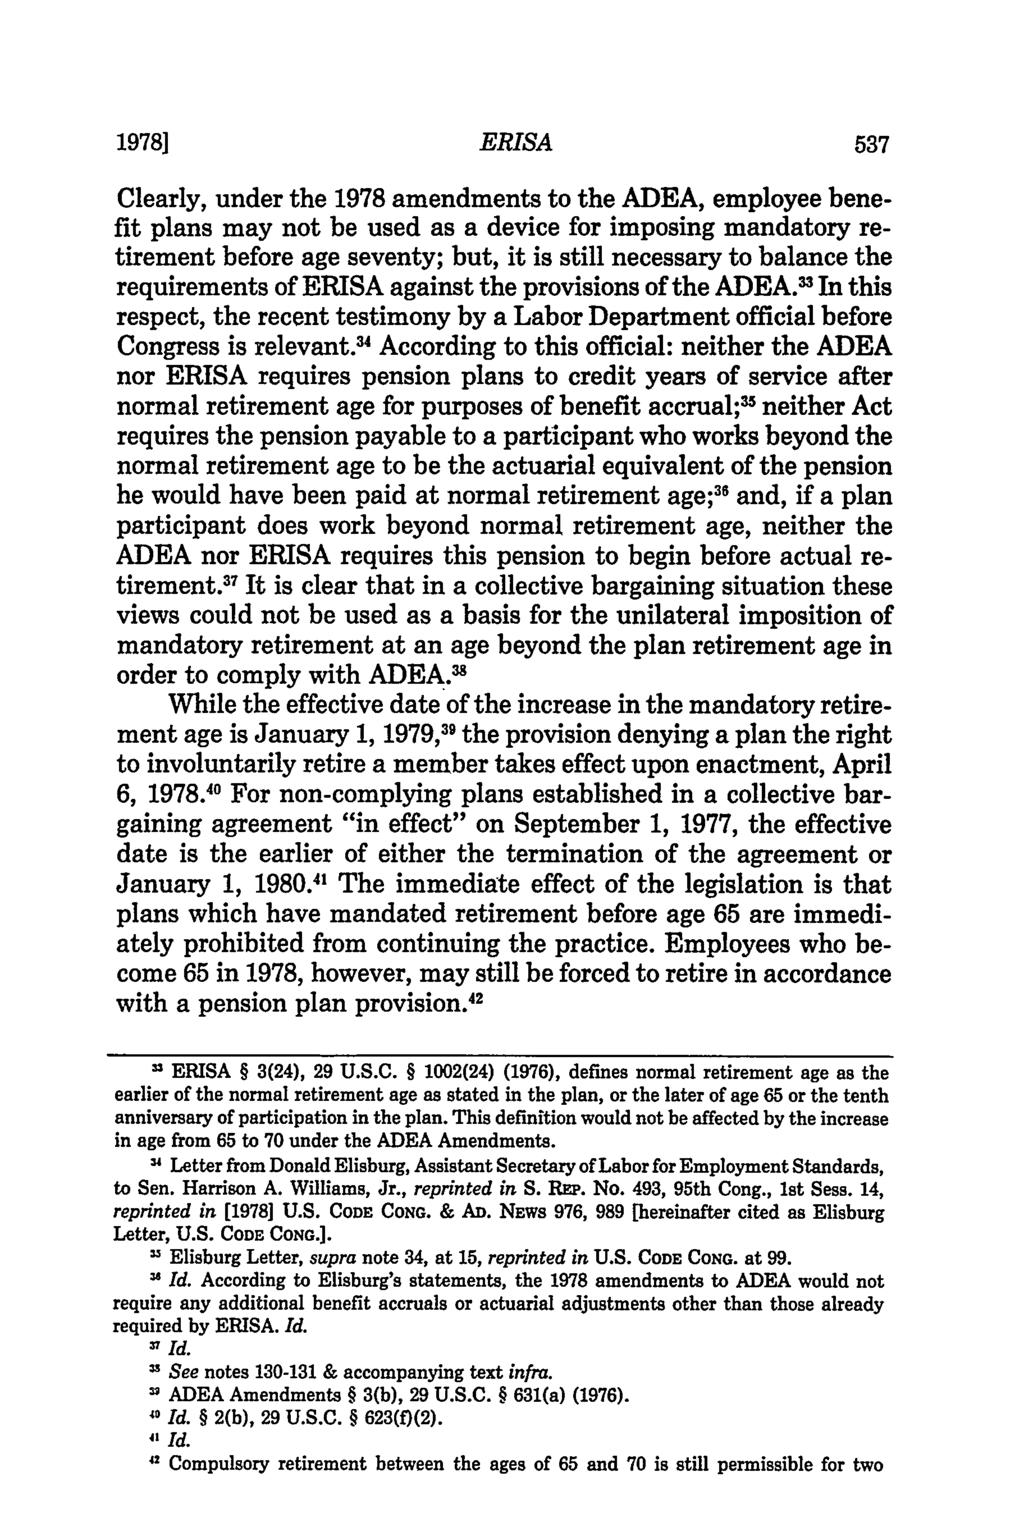 1978] ERISA Clearly, under the 1978 amendments to the ADEA, employee benefit plans may not be used as a device for imposing mandatory retirement before age seventy; but, it is still necessary to